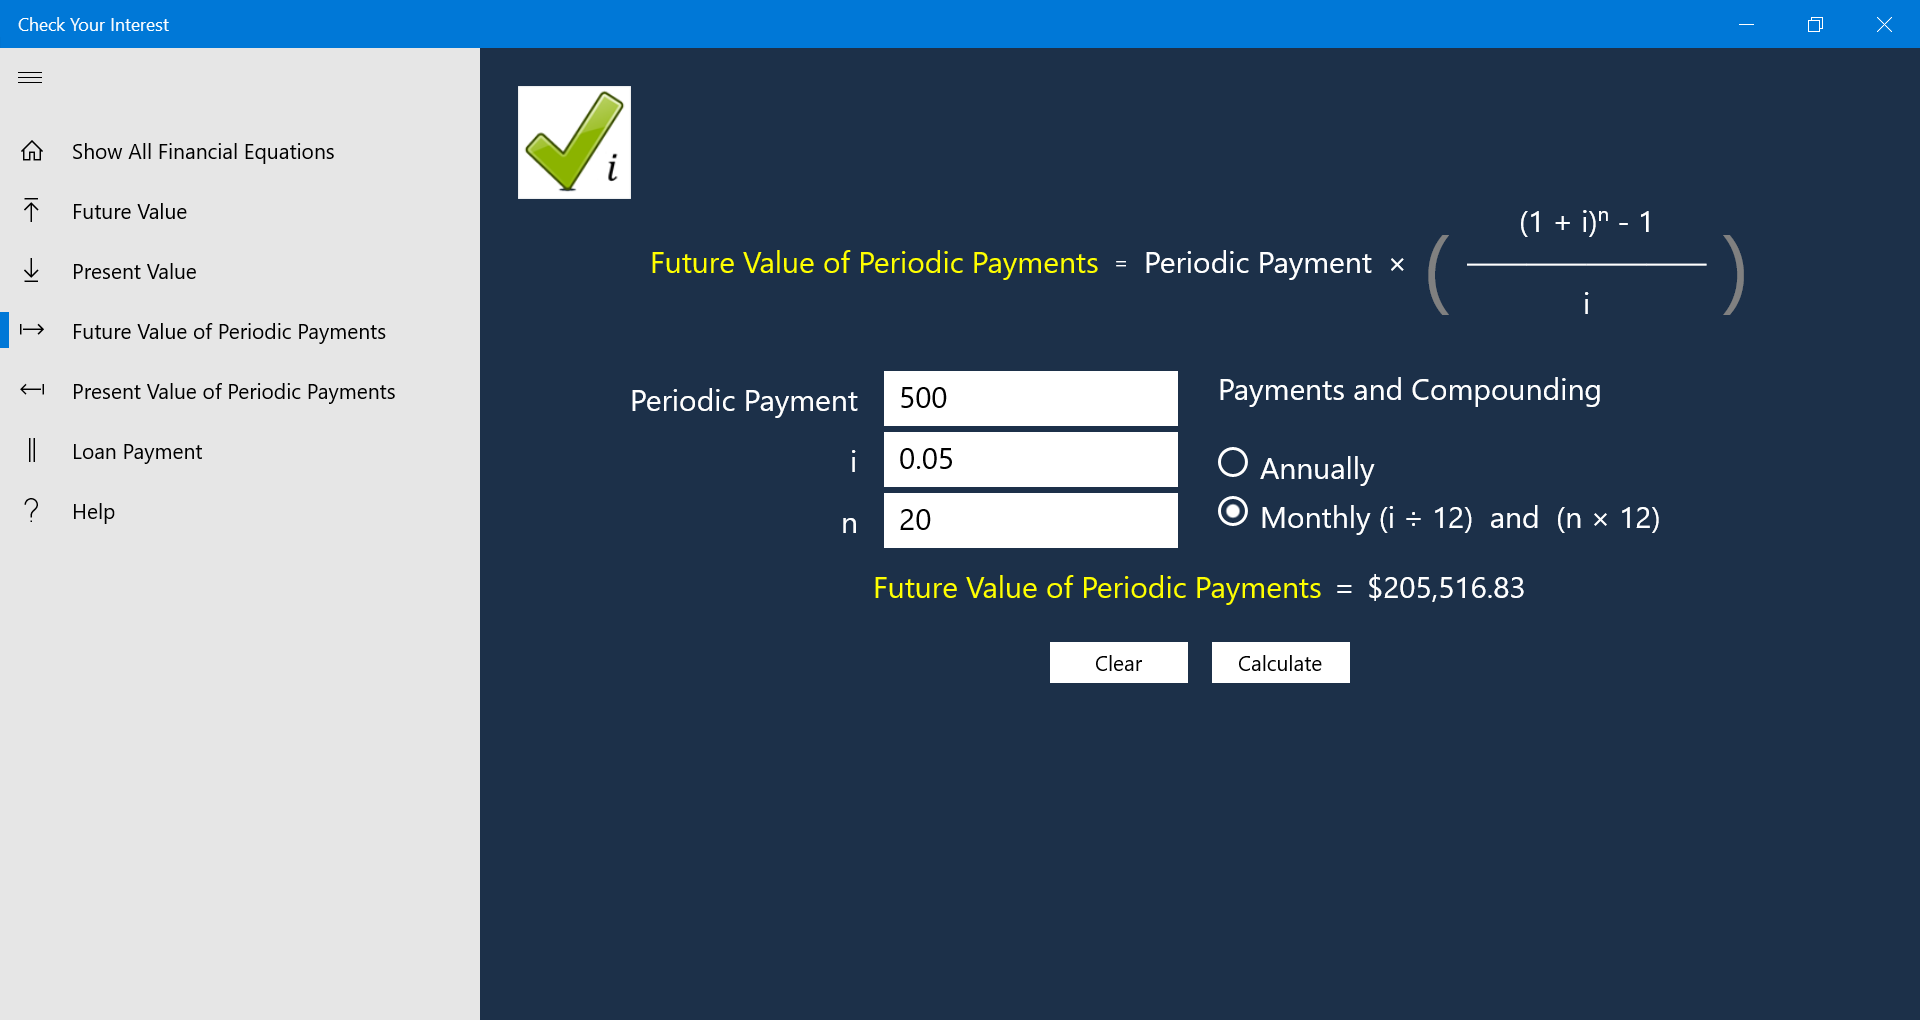 Future Value of Periodic Payments